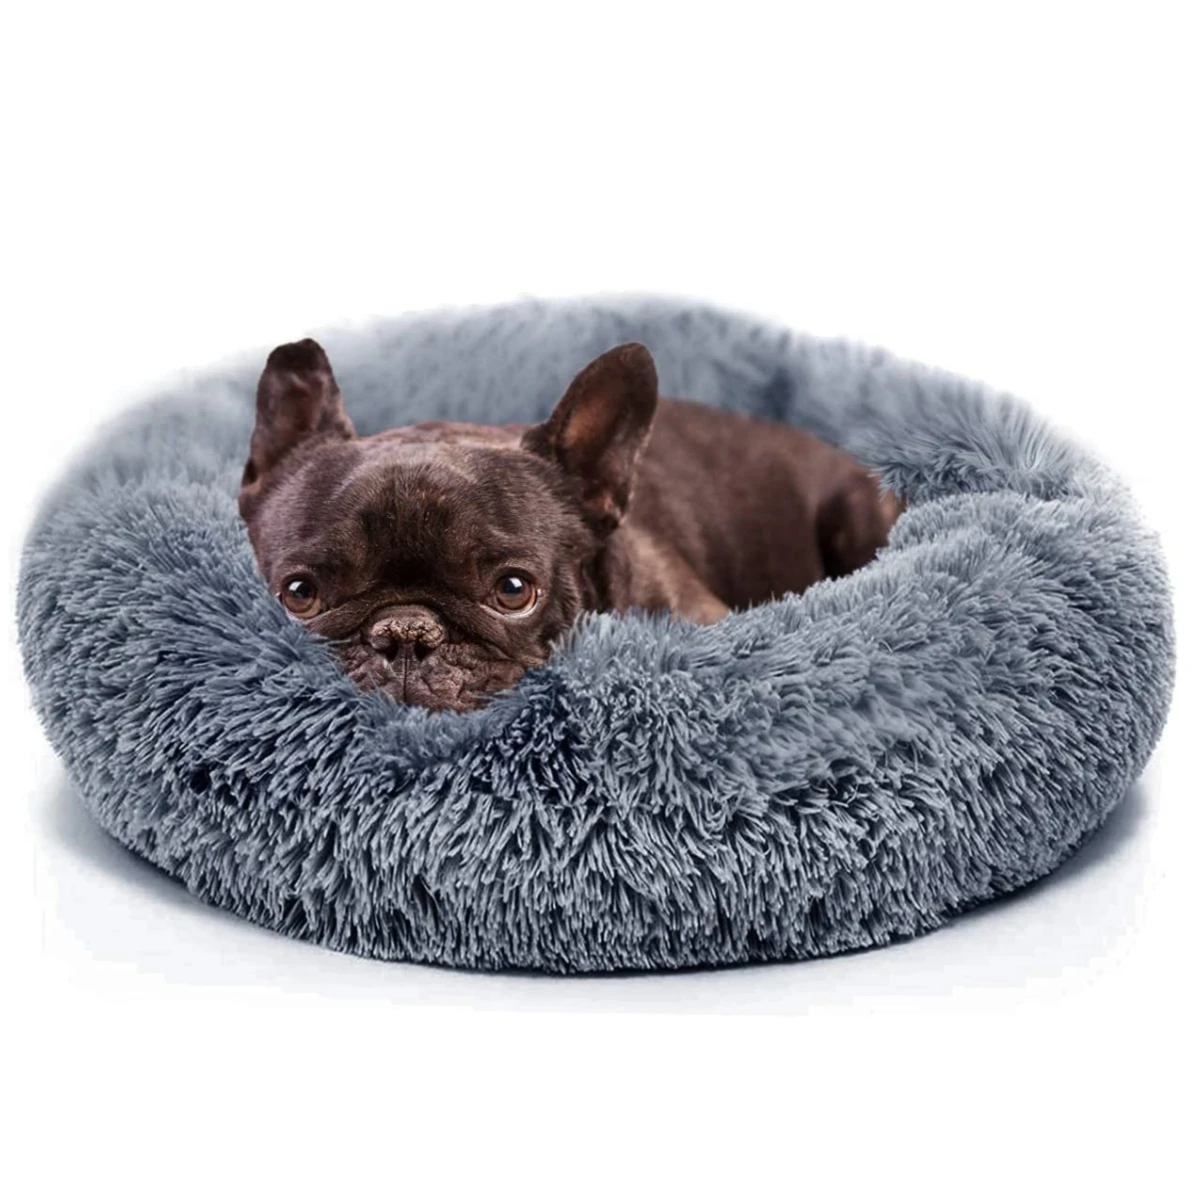 

Paw Pet Sofa Dog Beds Soft Material Nest Dog Baskets 6 Colors Soft Fleece Warm Cat Bed Fall and Winter Warm Kennel For Cat Puppy